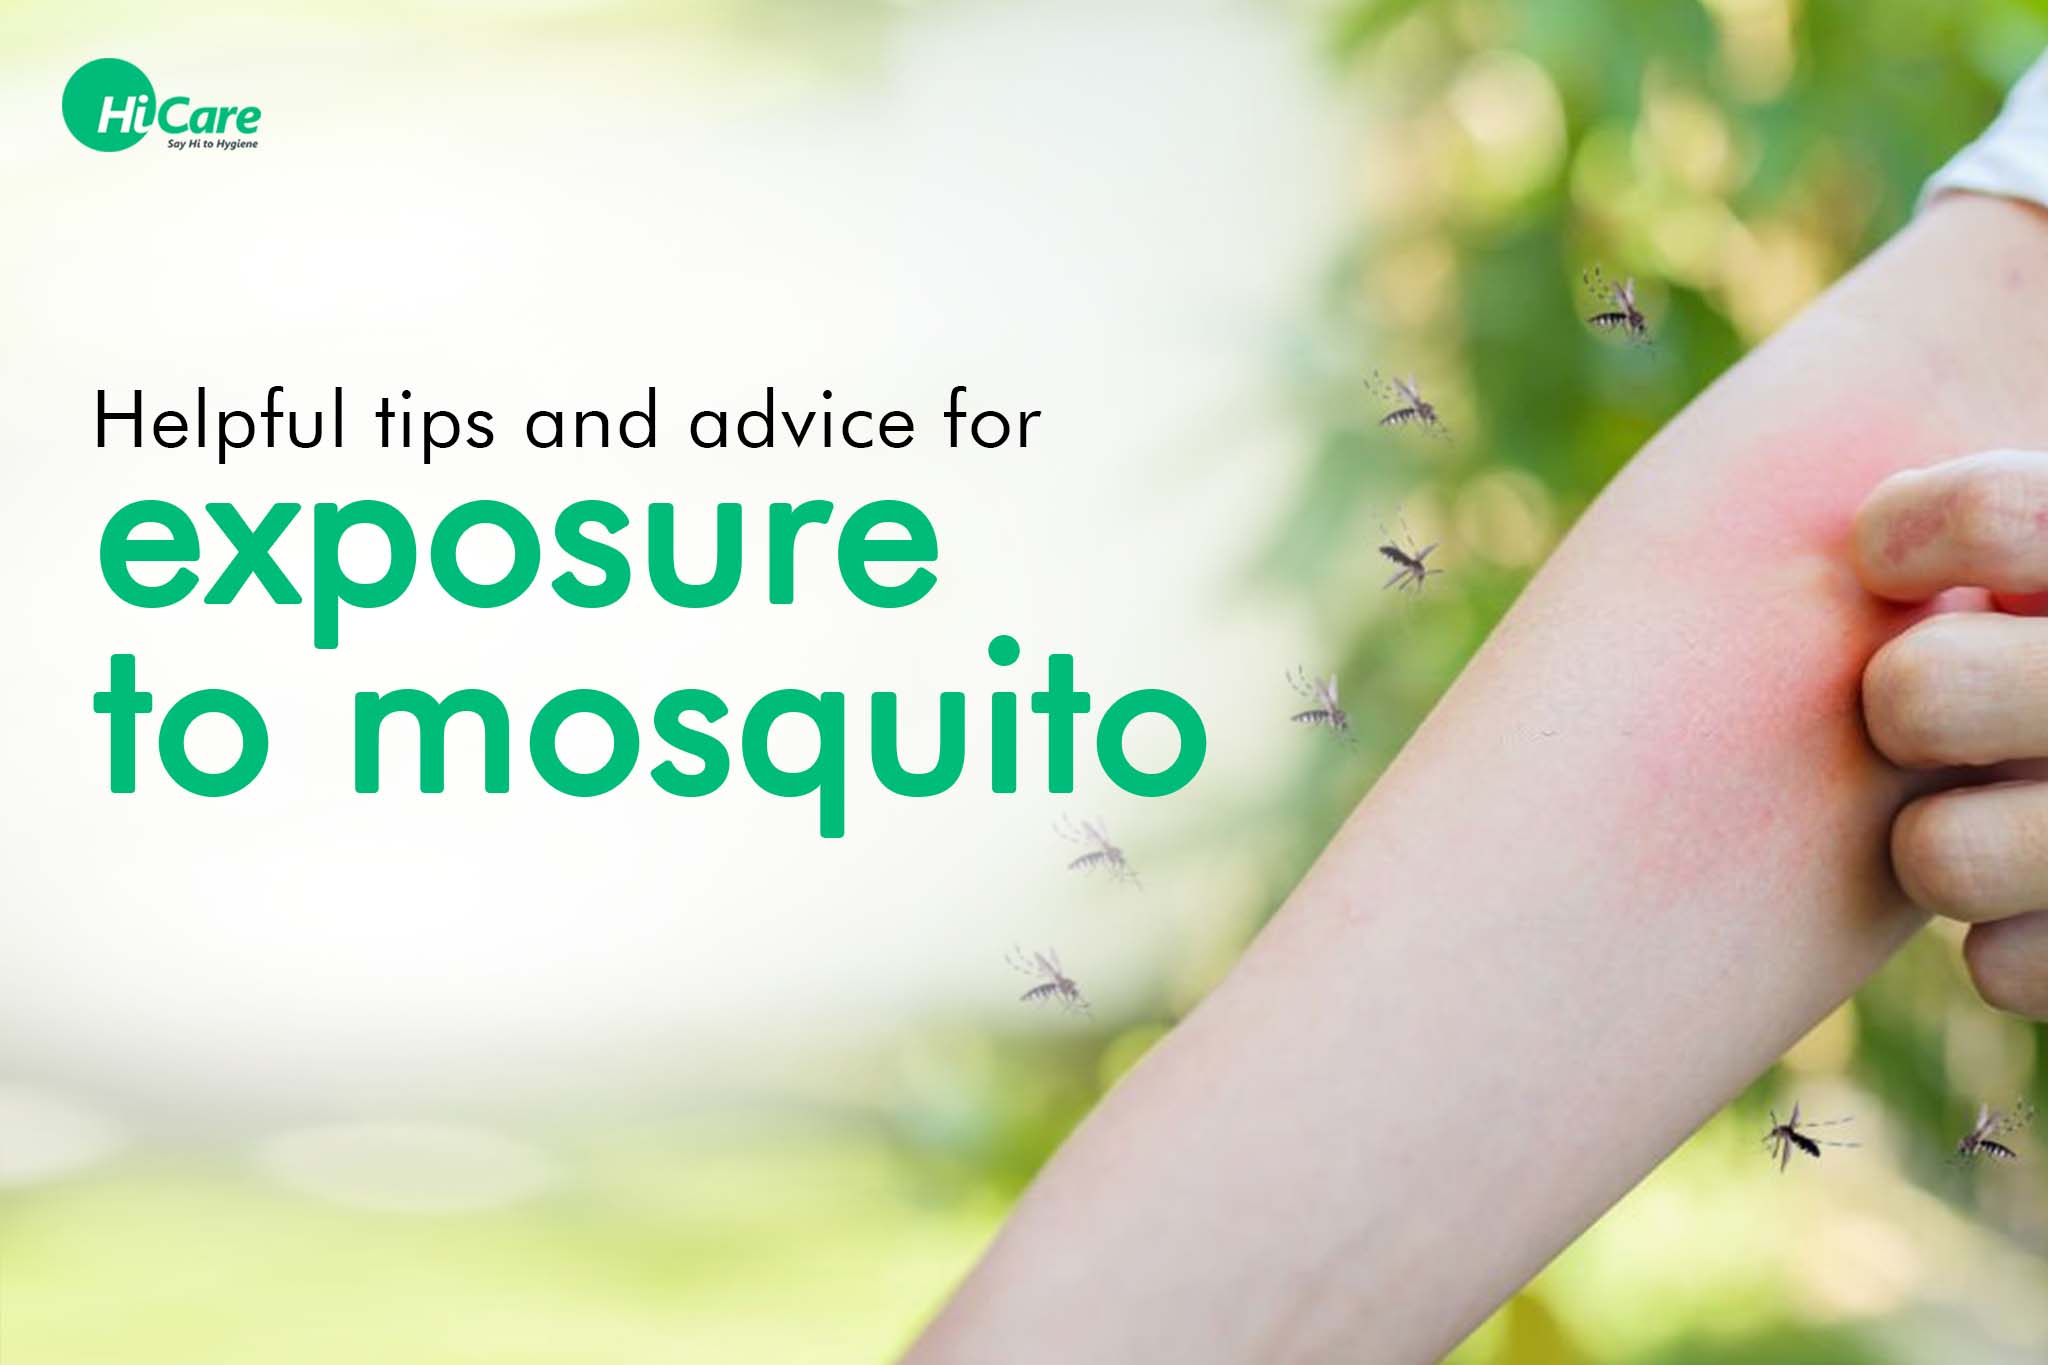 5 helpful tips and advice for exposure to mosquito